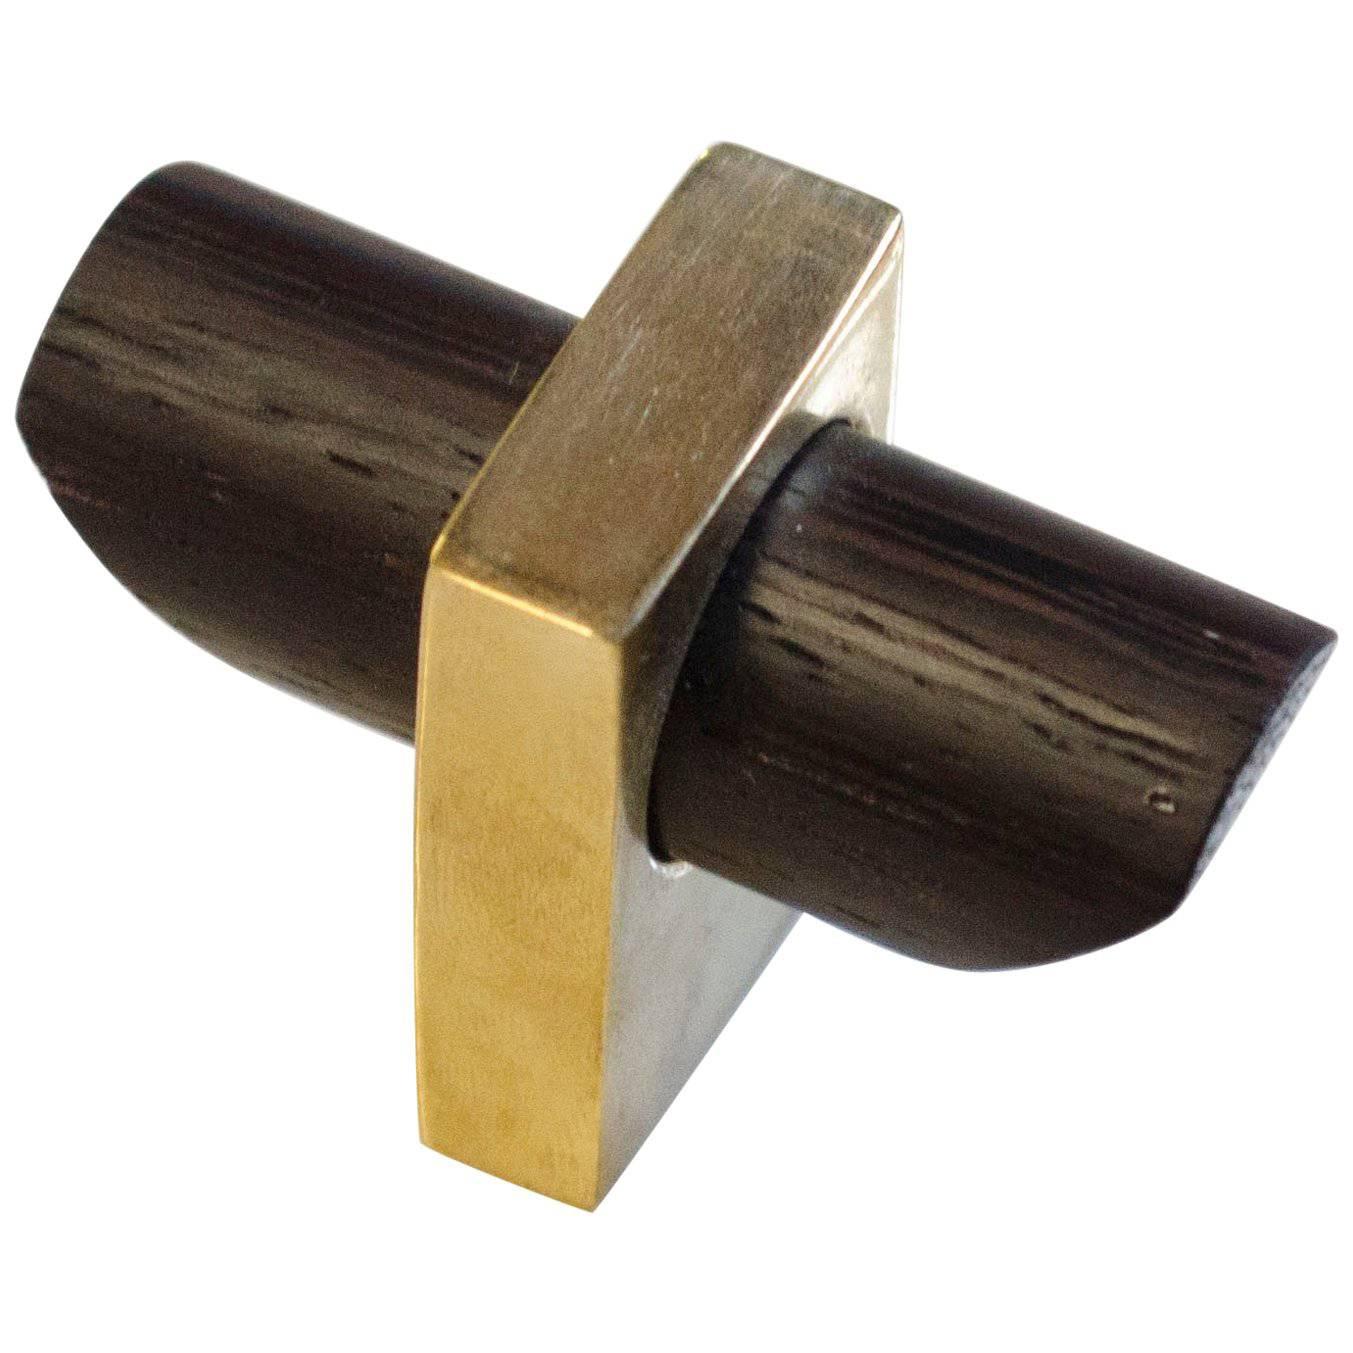 Tao Toggle, Wenge and Brass, DLV Hardware, Wood and Metal Small Pull for Cabinet For Sale